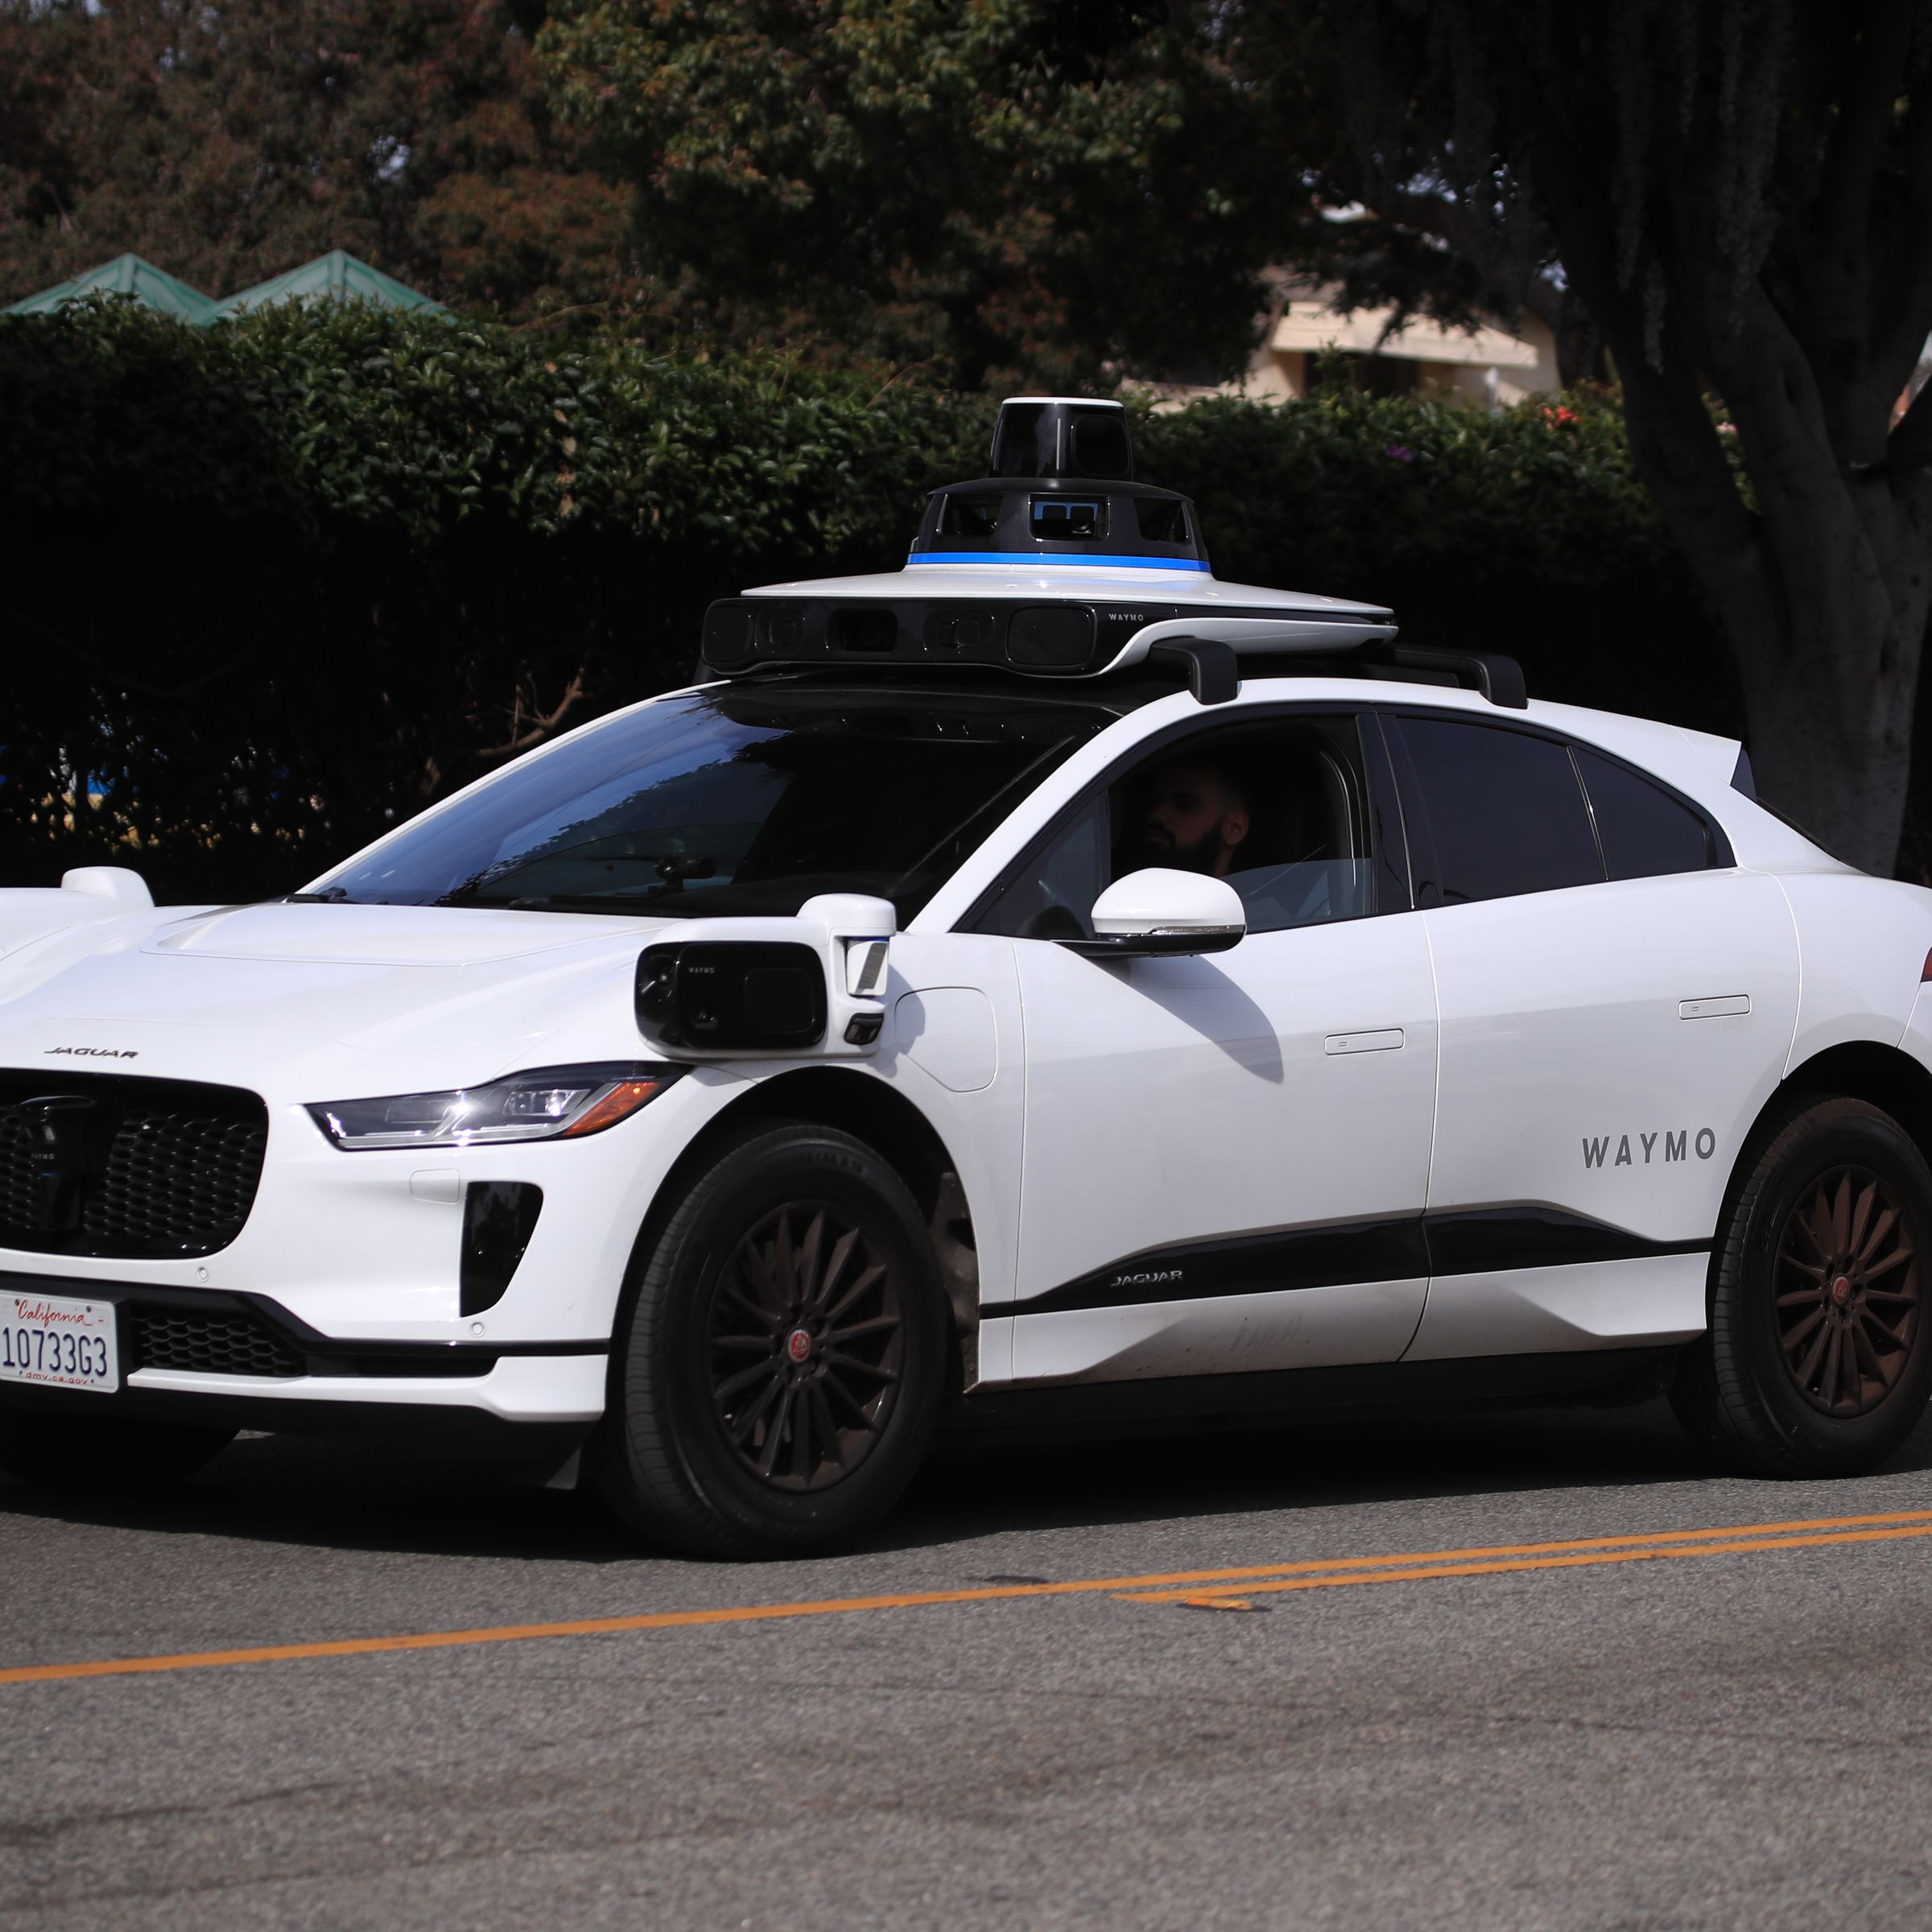 A self-driving Waymo car drives on a road in Santa Monica on February 21st, 2023.